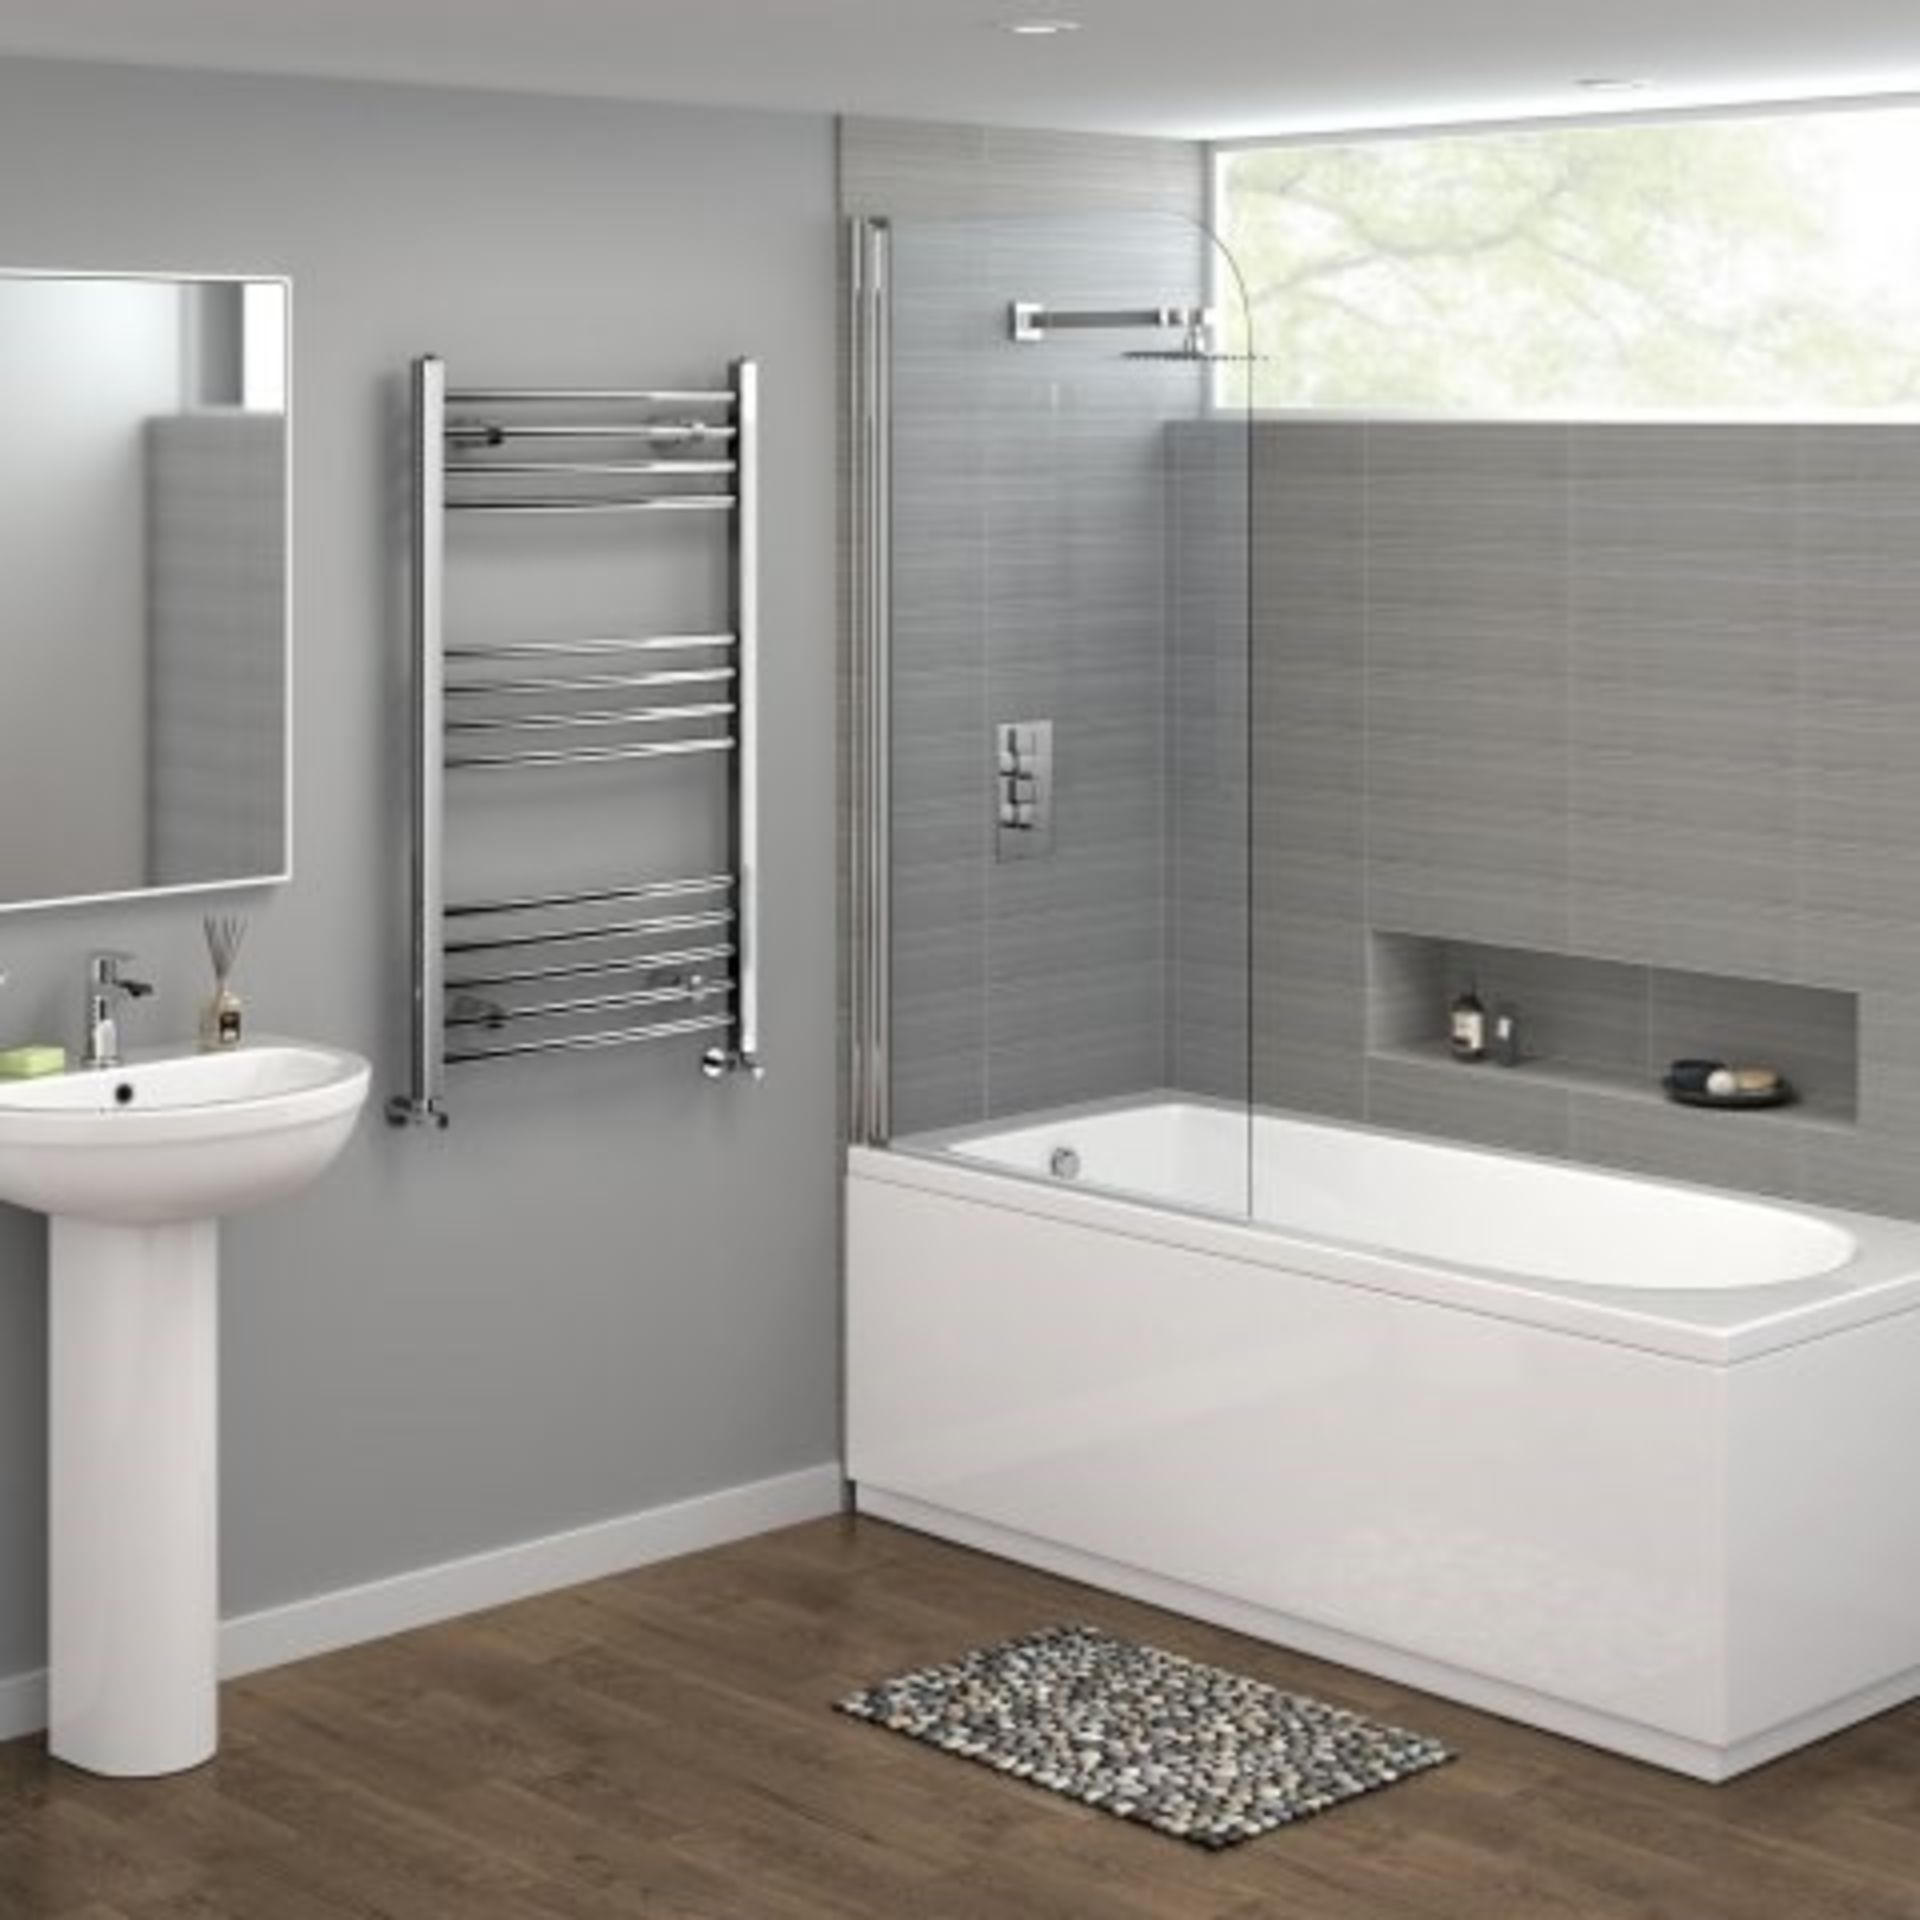 1200x600mm - 20mm Tubes - RRP £219.99 each.Chrome Curved Rail Ladder Towel Radiator. Our Nanc... - Image 2 of 3